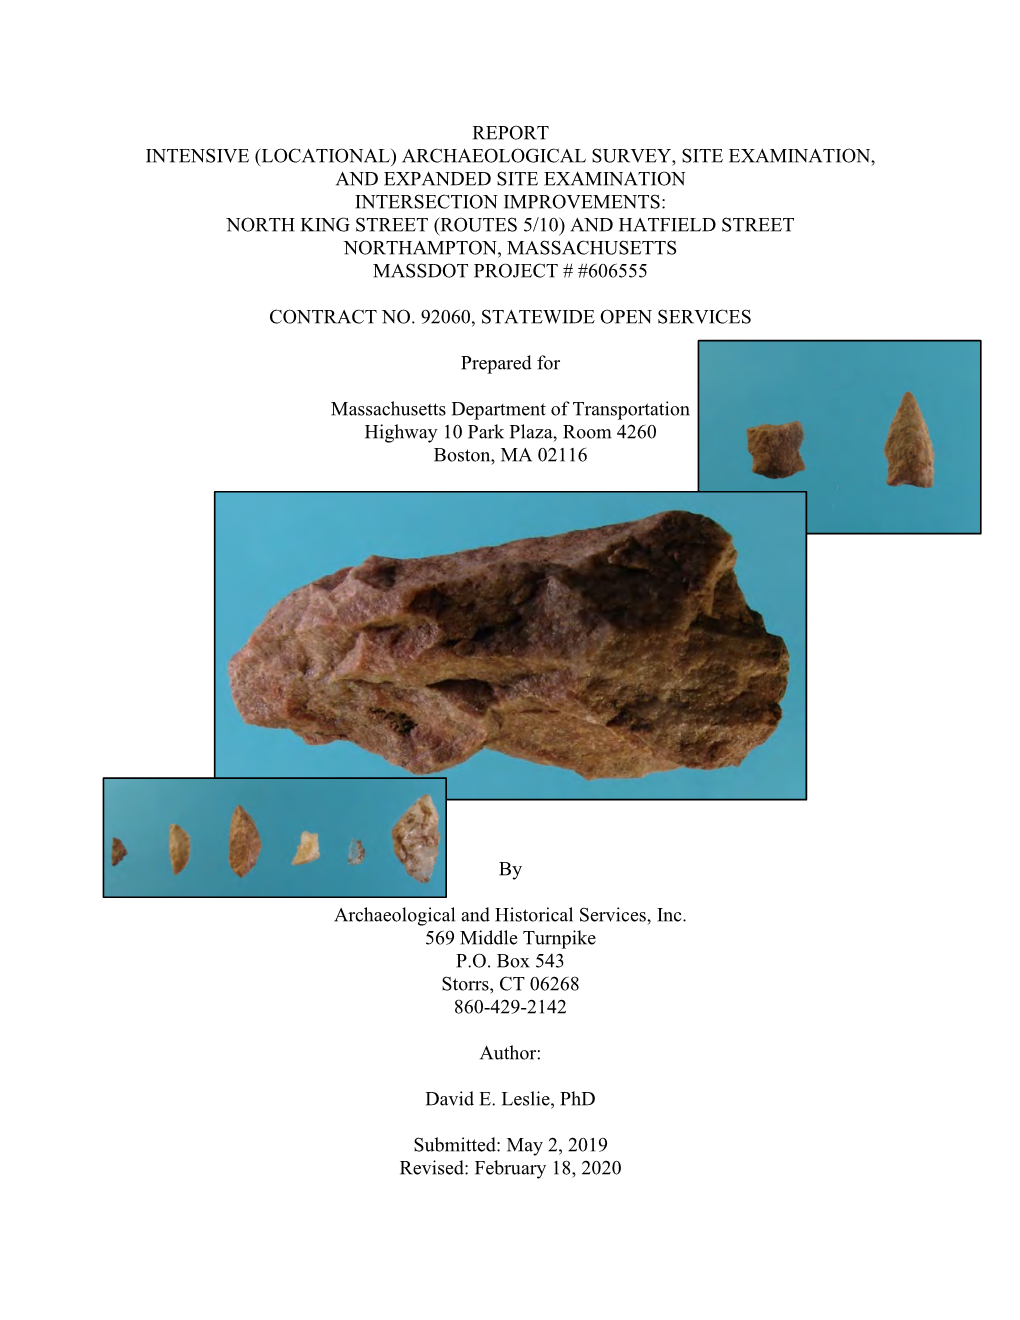 Read the State Archaeological Report on the Historic